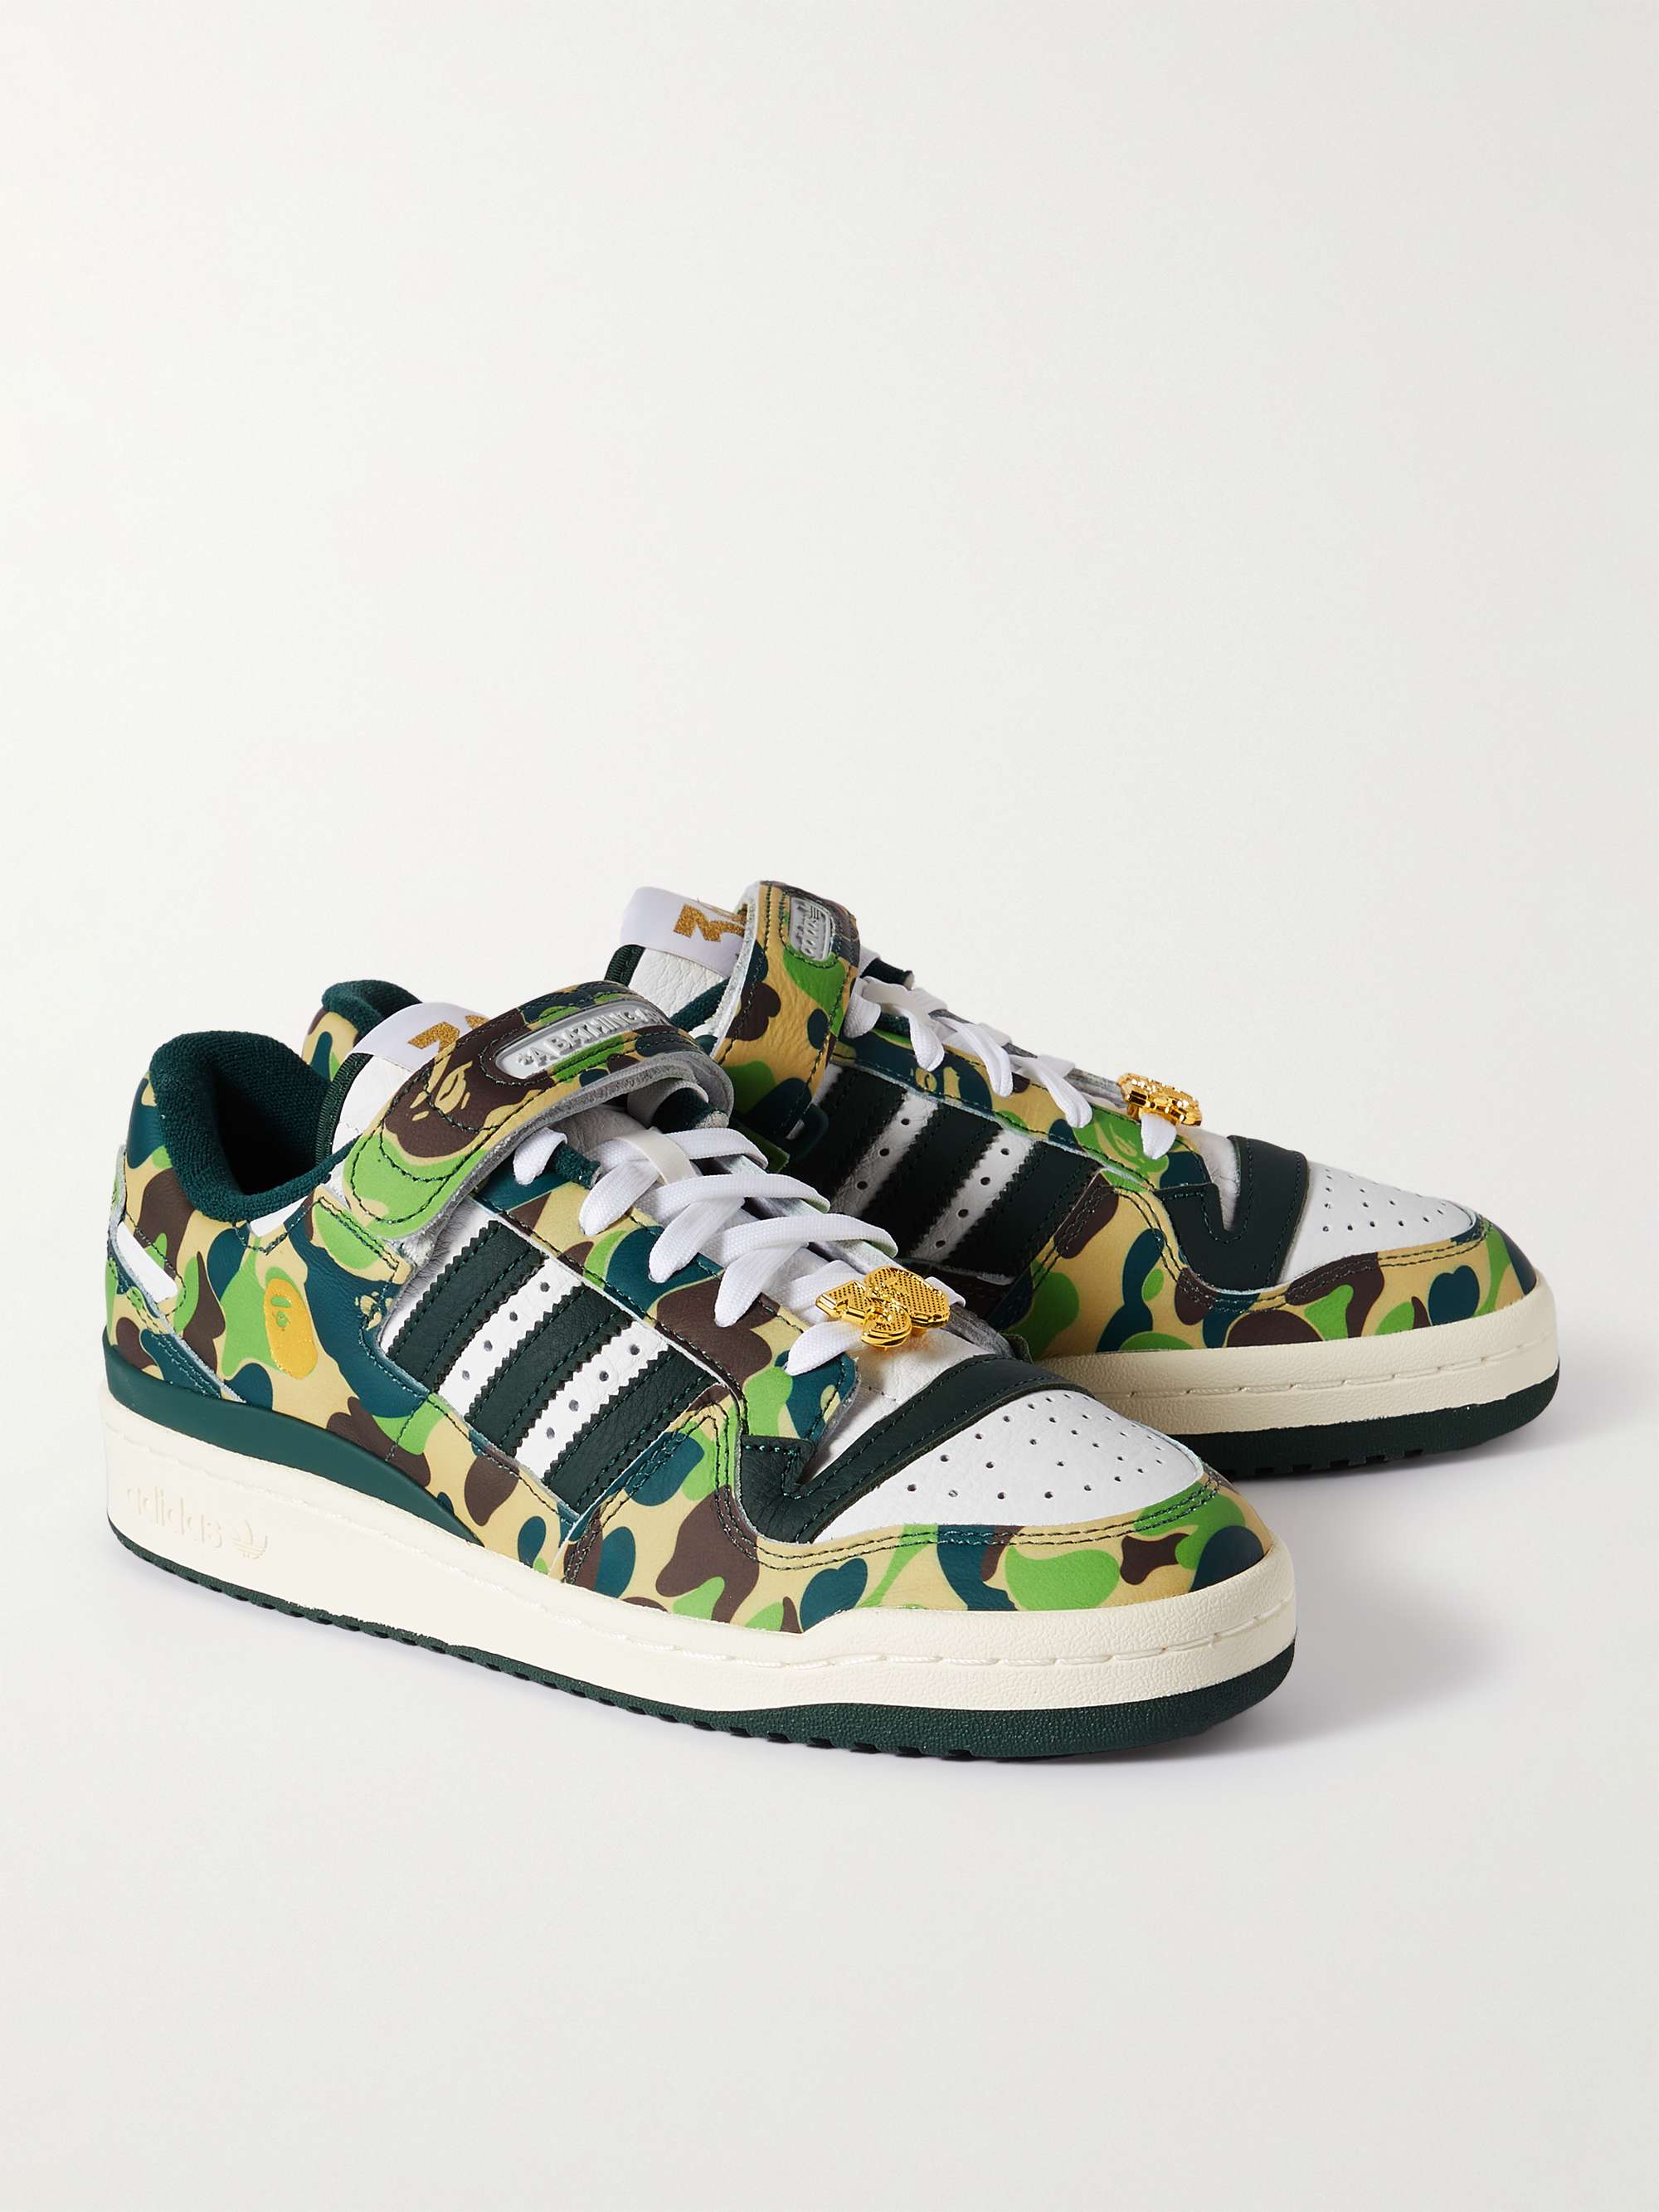 ADIDAS ORIGINALS + A Bathing Ape Forum 84 Low Embellished Printed Leather Sneakers